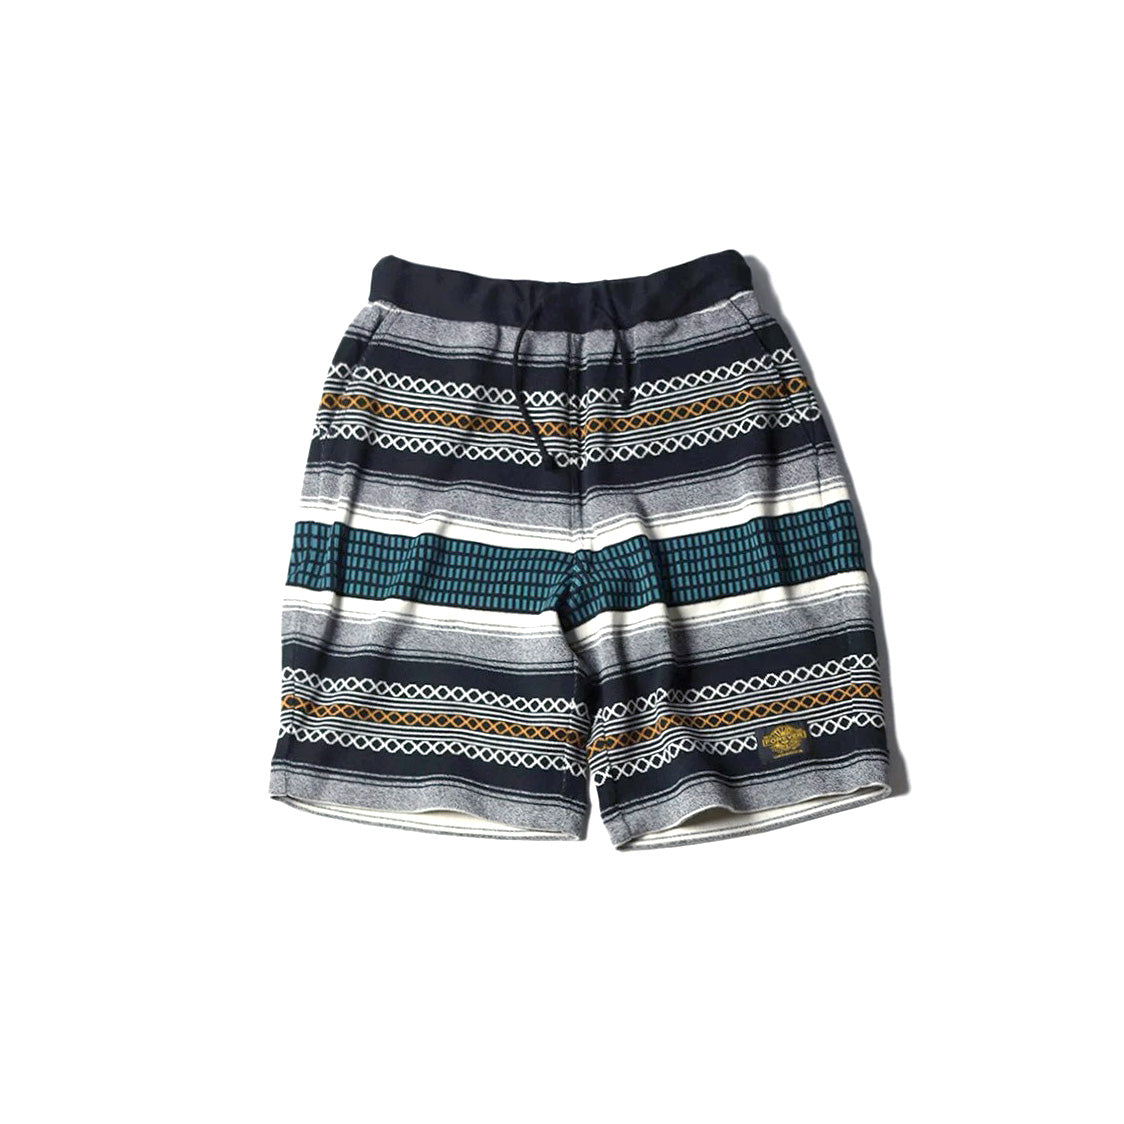 May club -【WESTRIDE】NGT KNIT SHORTS - OUTLAW RUG BLUE